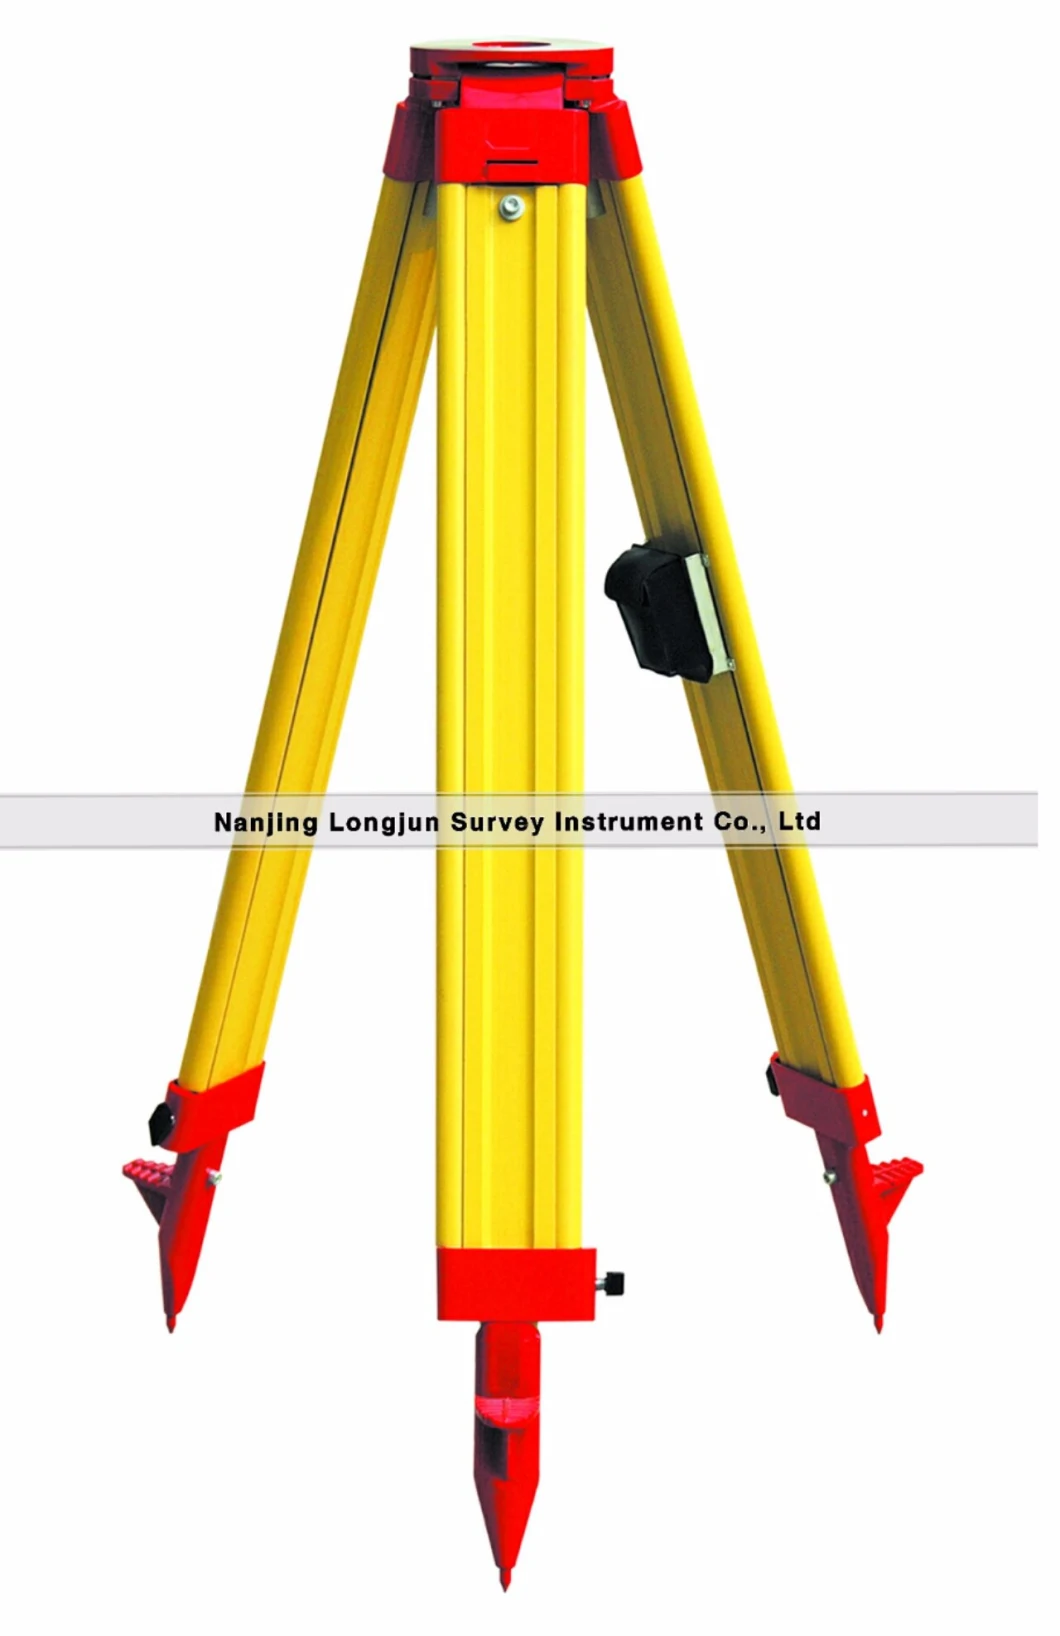 Telescopic Tripod for Total Station Surveying (LJW10A)